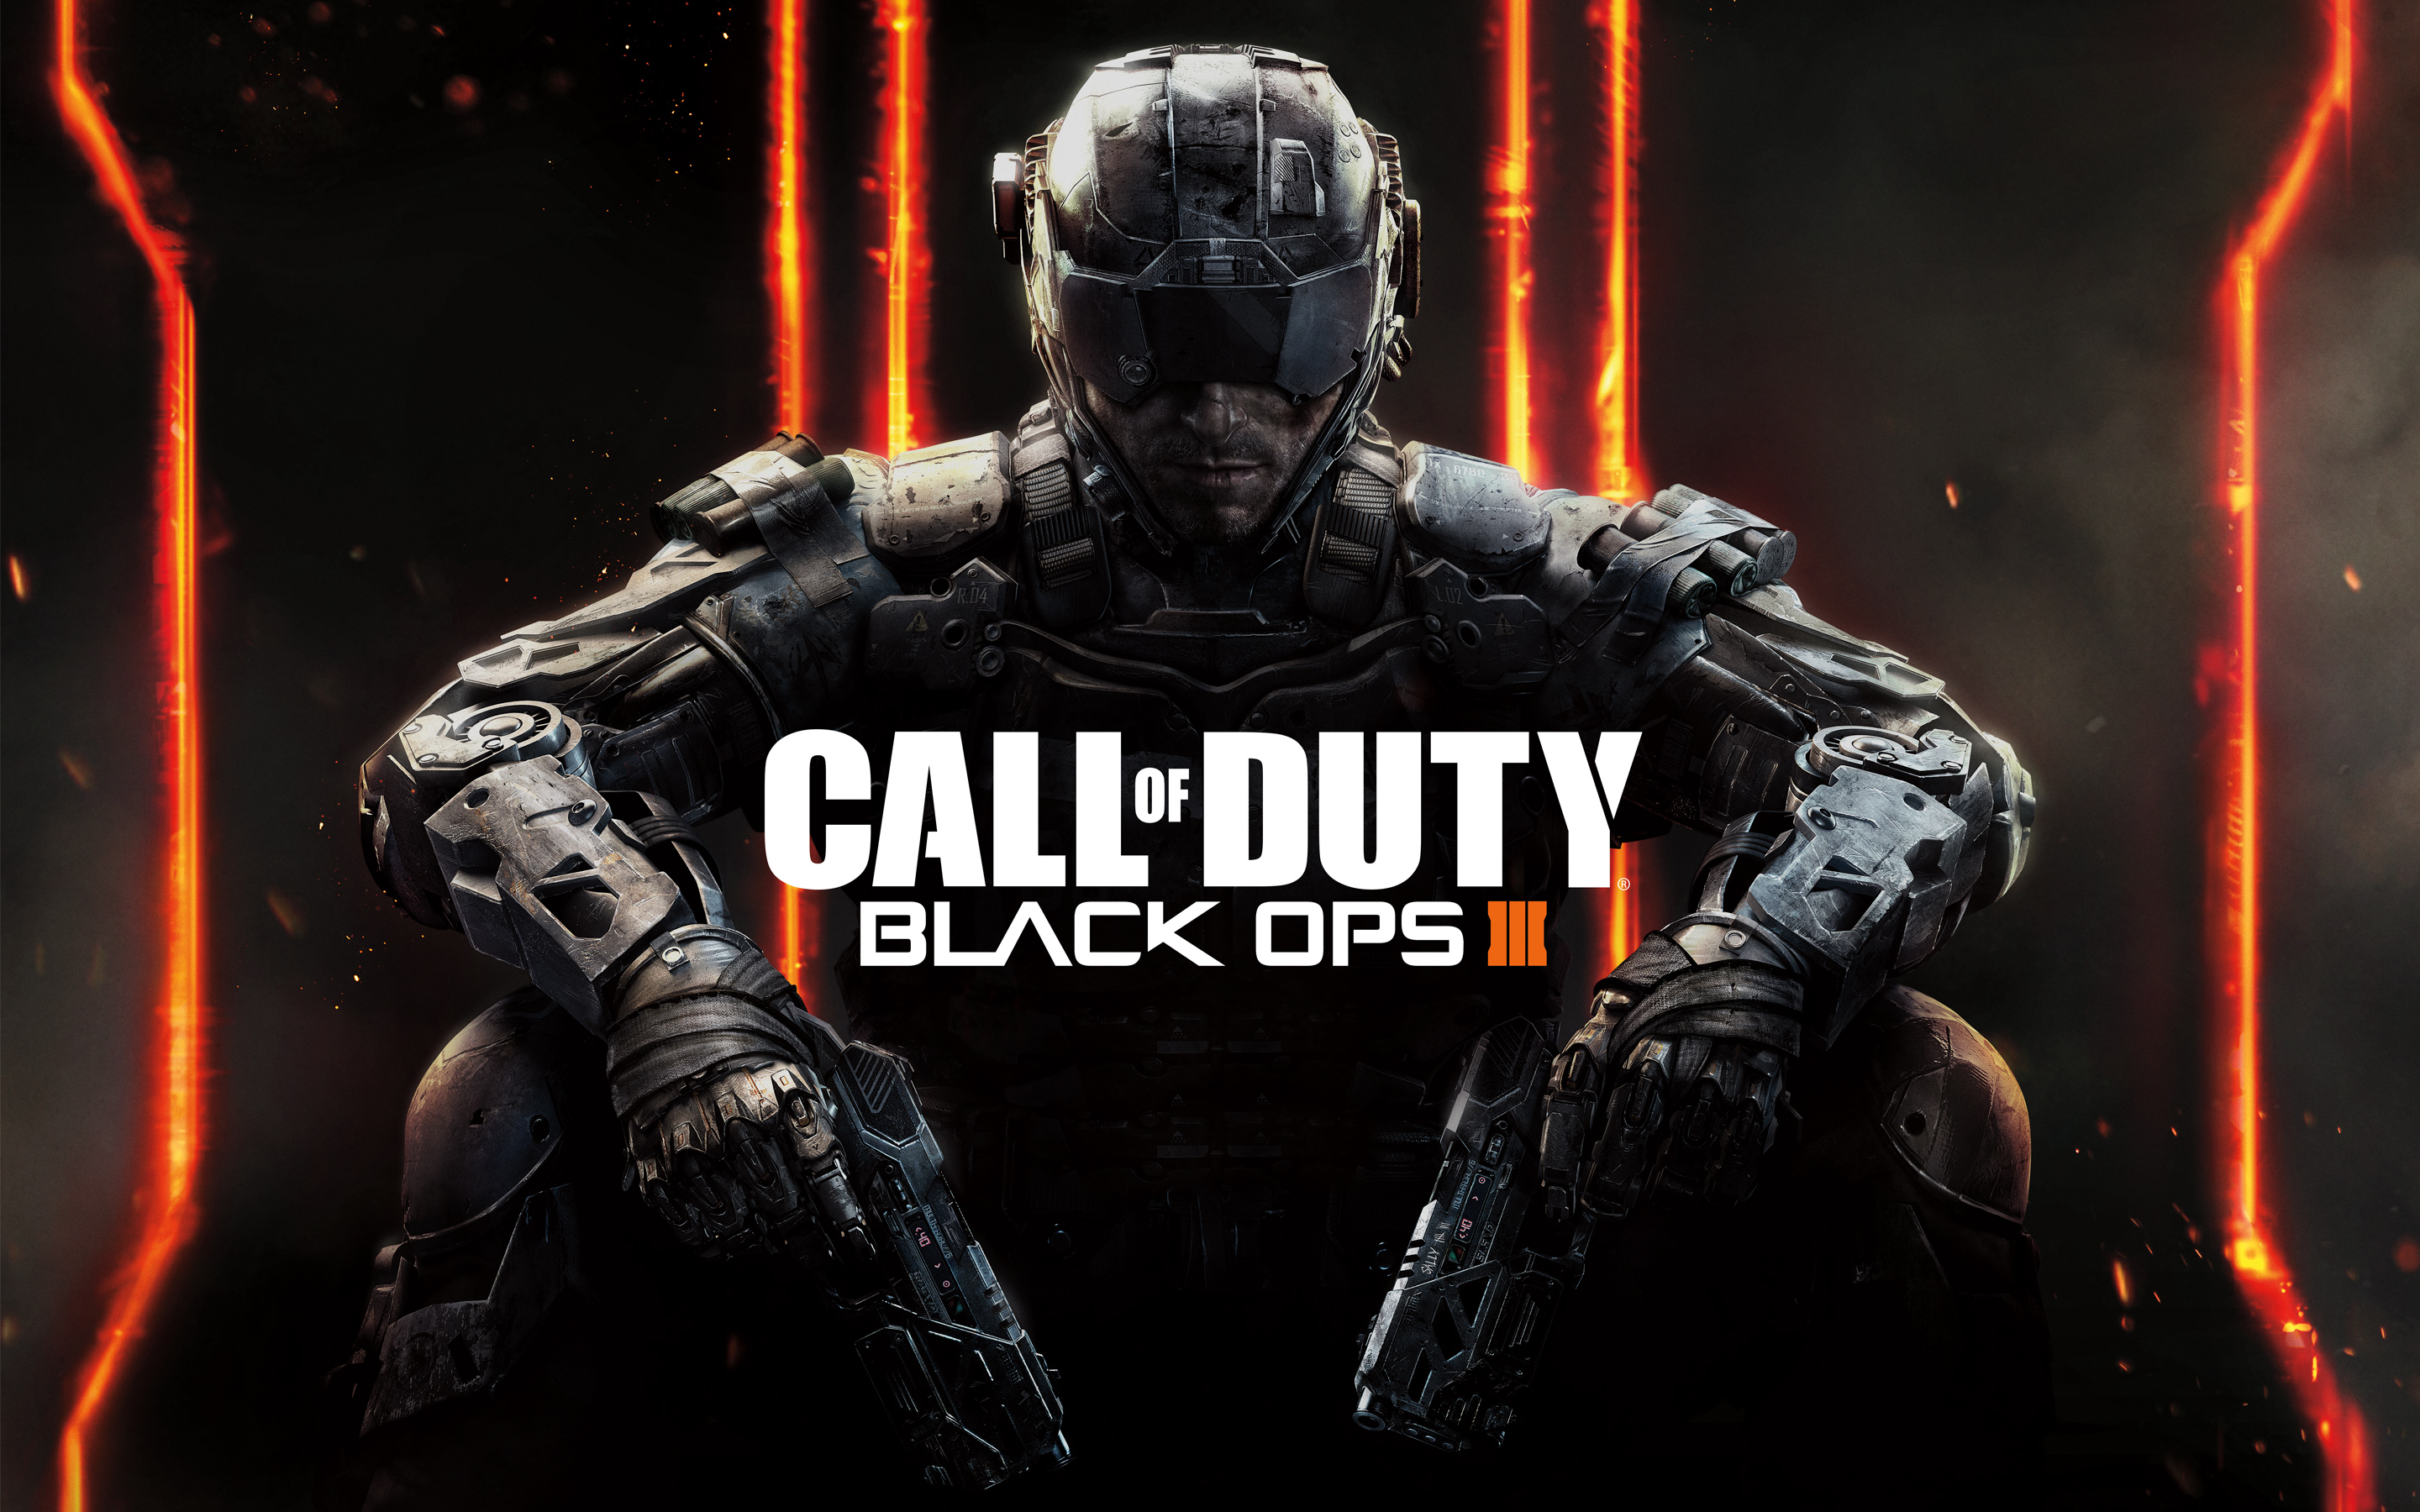 Call of Duty Black Ops III Wallpapers HD Wallpapers